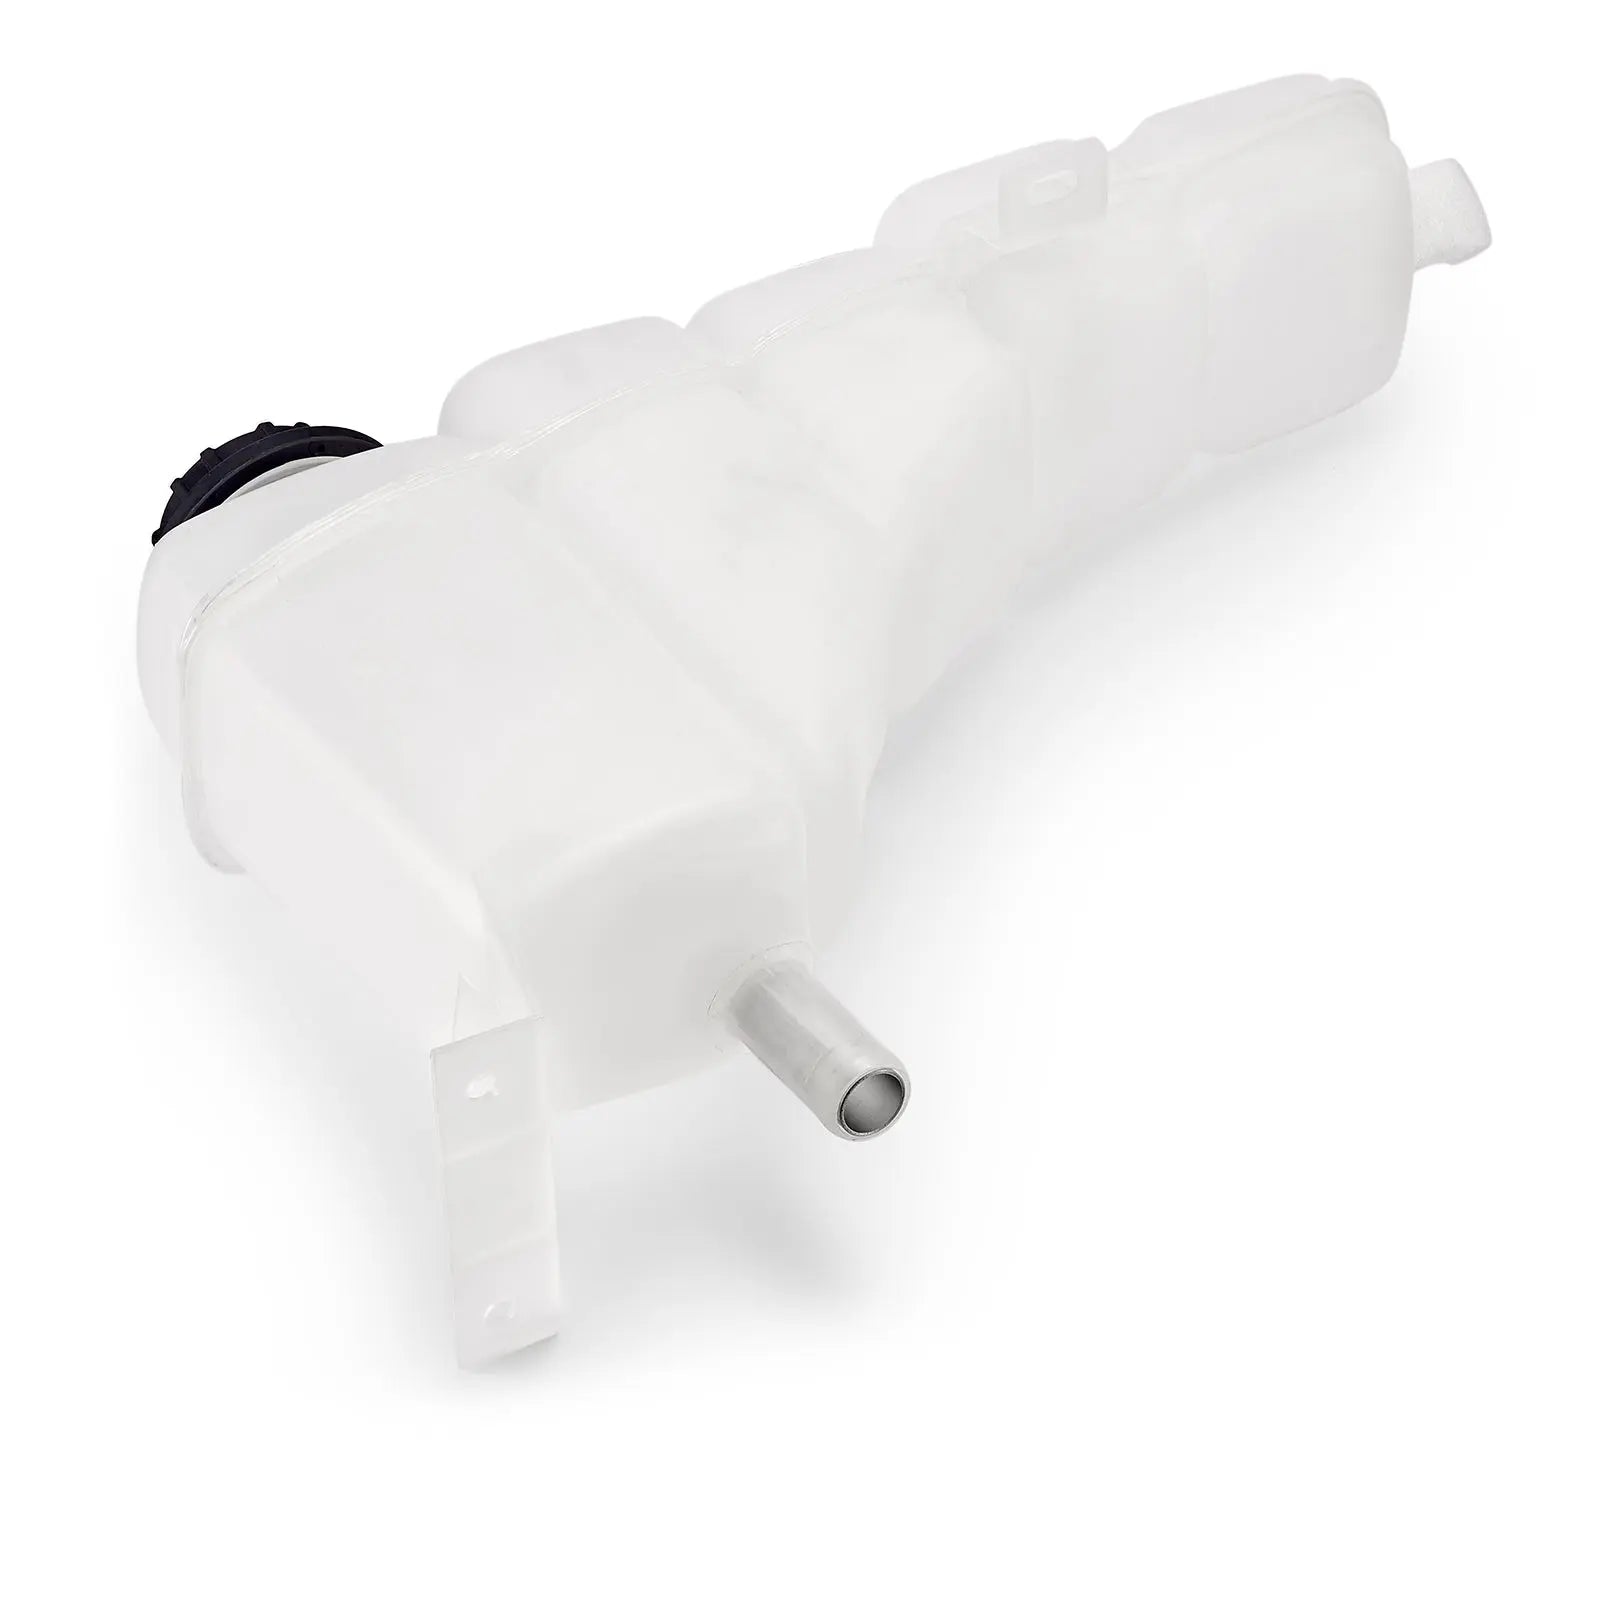 Coolant Reservoir Tank 603213 for 2000-2005 Ford Excursion, 1999-2004 F250 F350 F450 F550 Super Duty, 2C3Z8A080AA Flashark